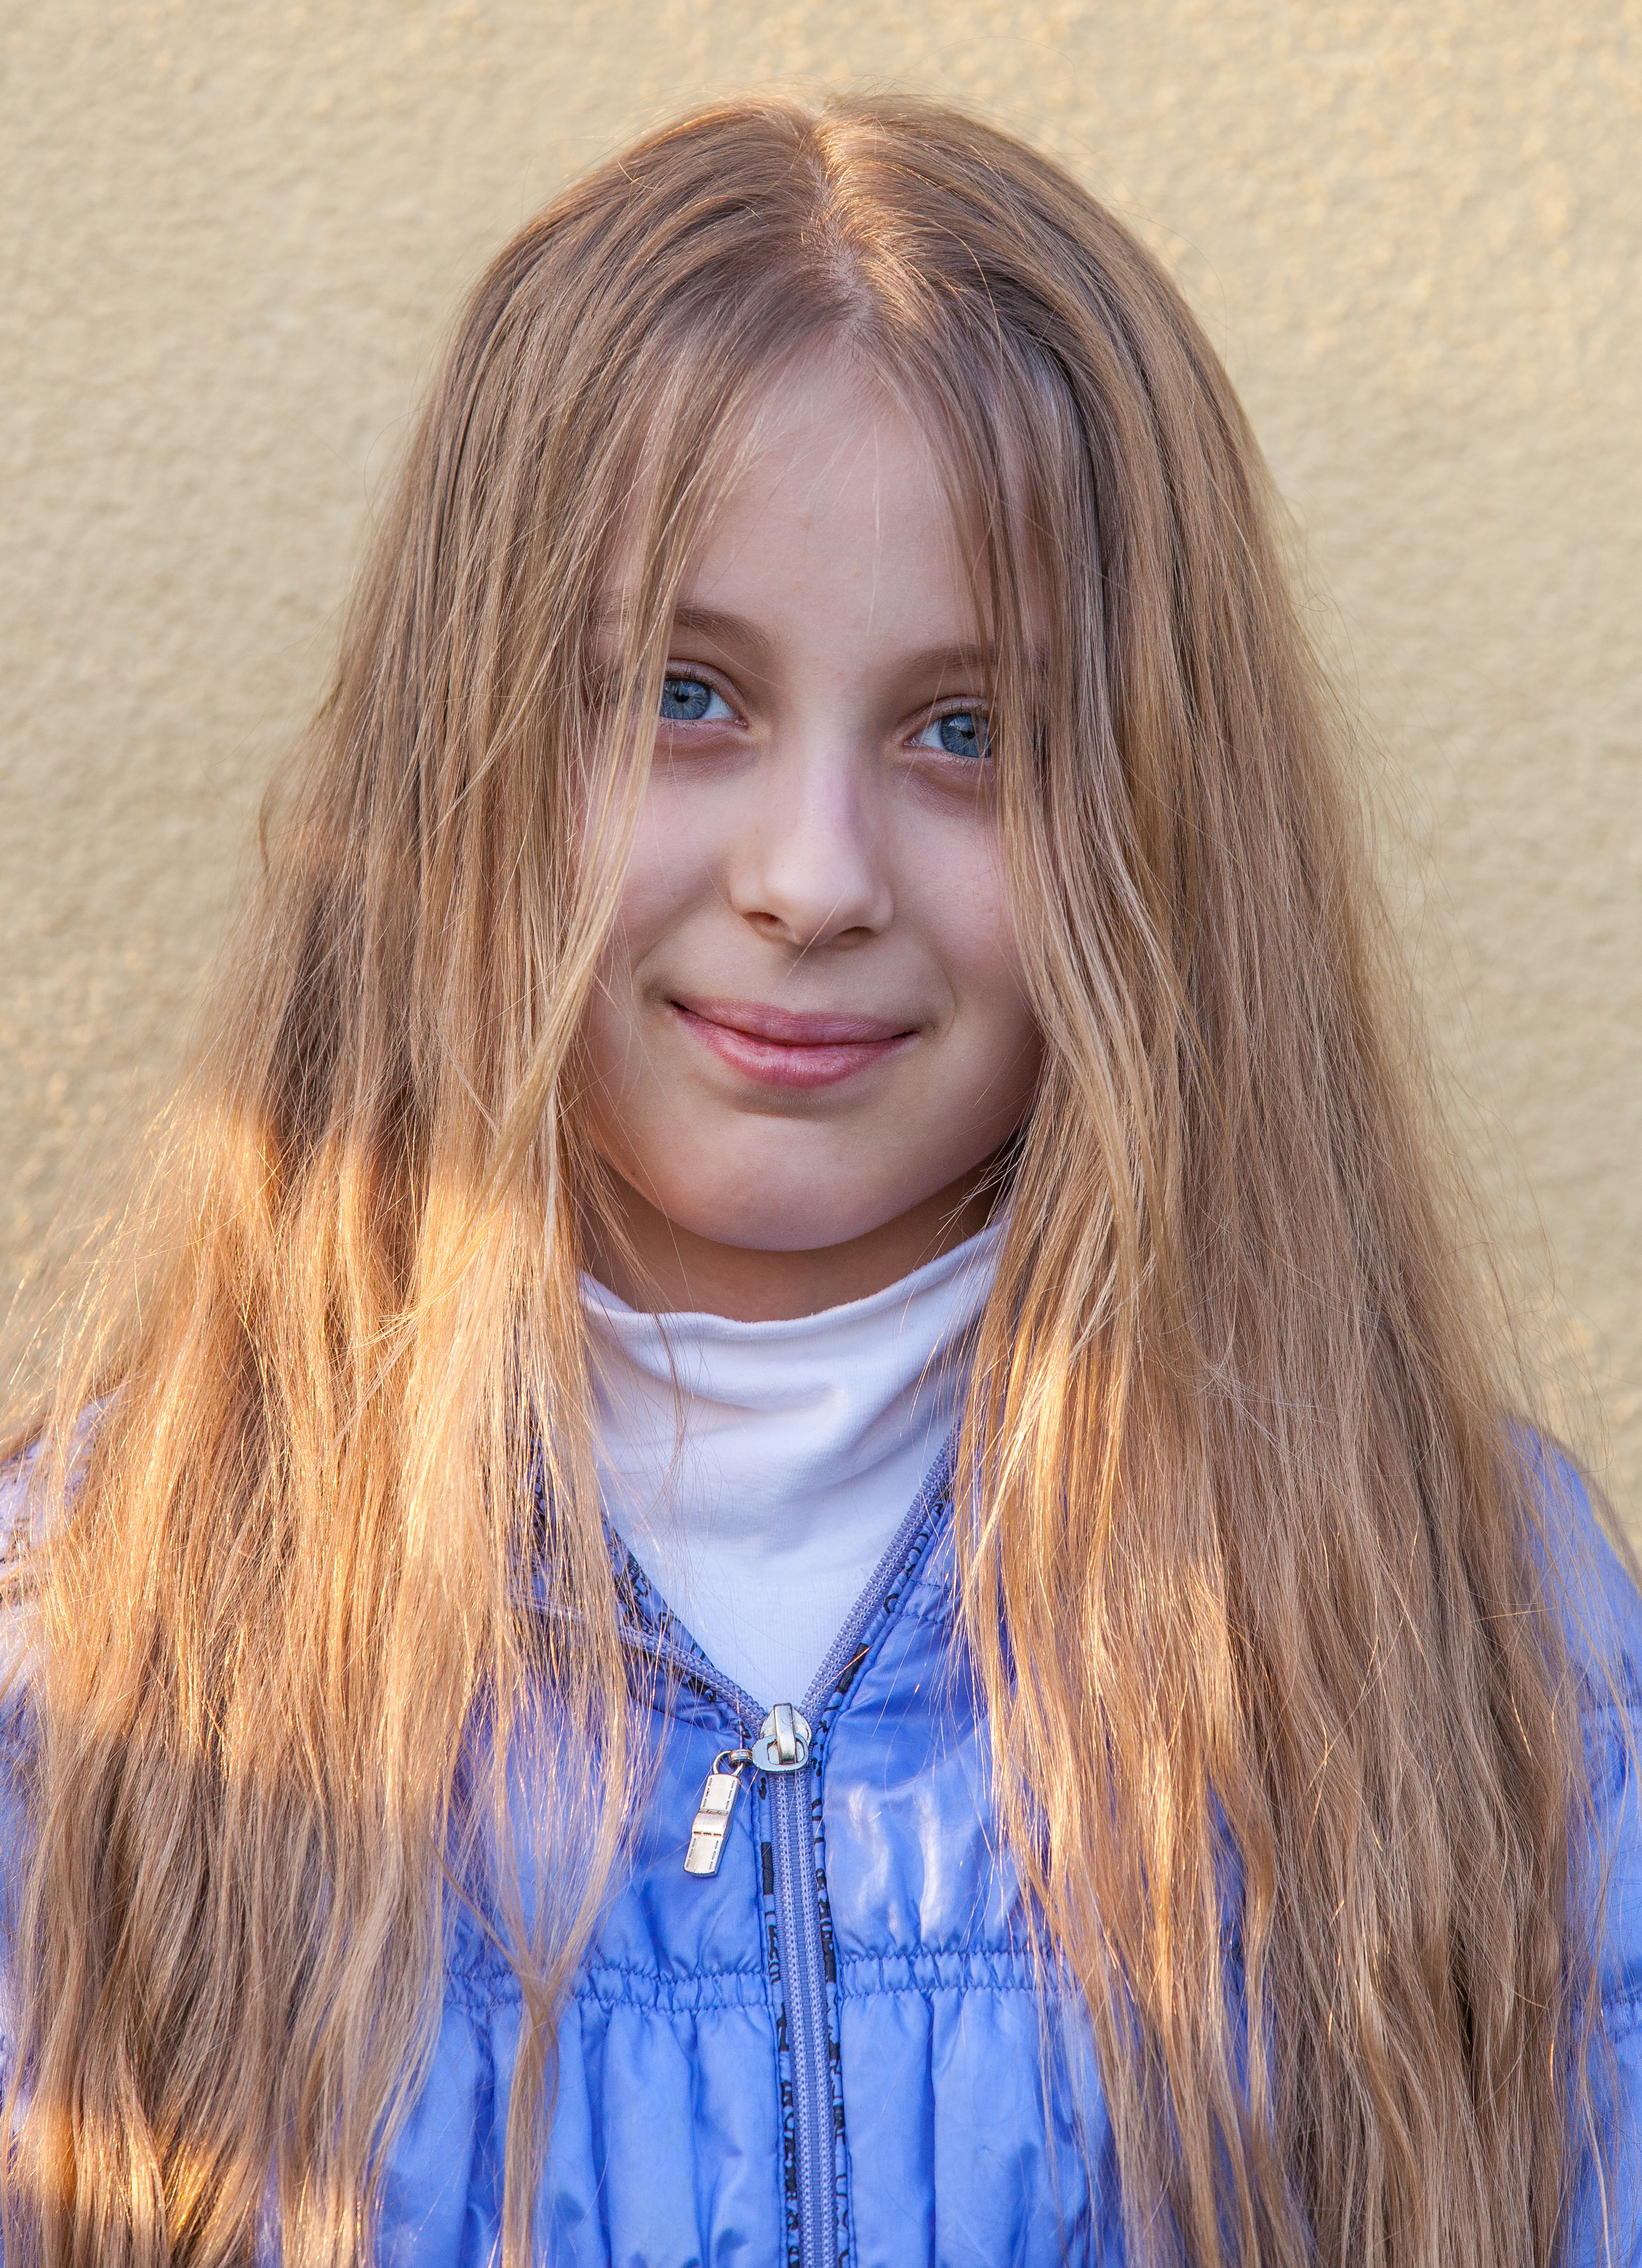 a blond long-haired Roman-Catholic girl photographed in April 2014, portrait 6 out of 11